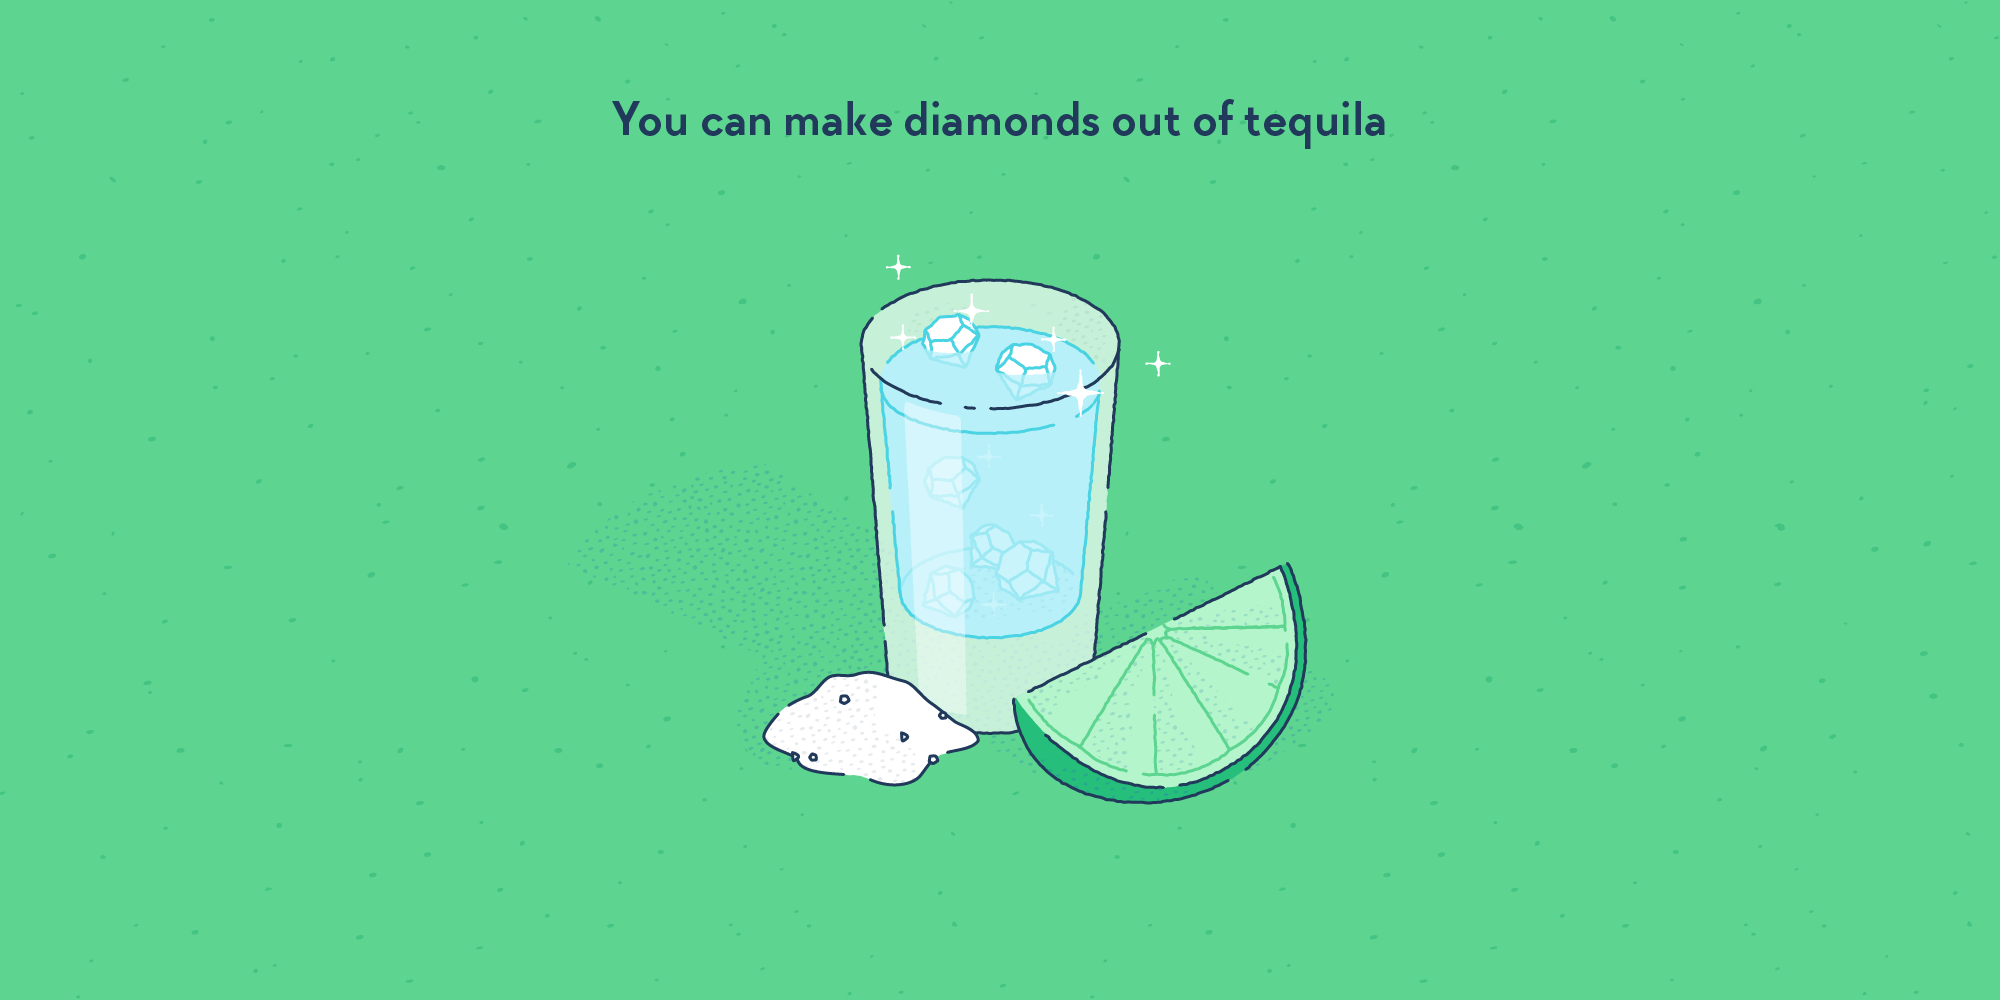 A tequila shot served with lime and salt. Diamonds can be seen in the glass.